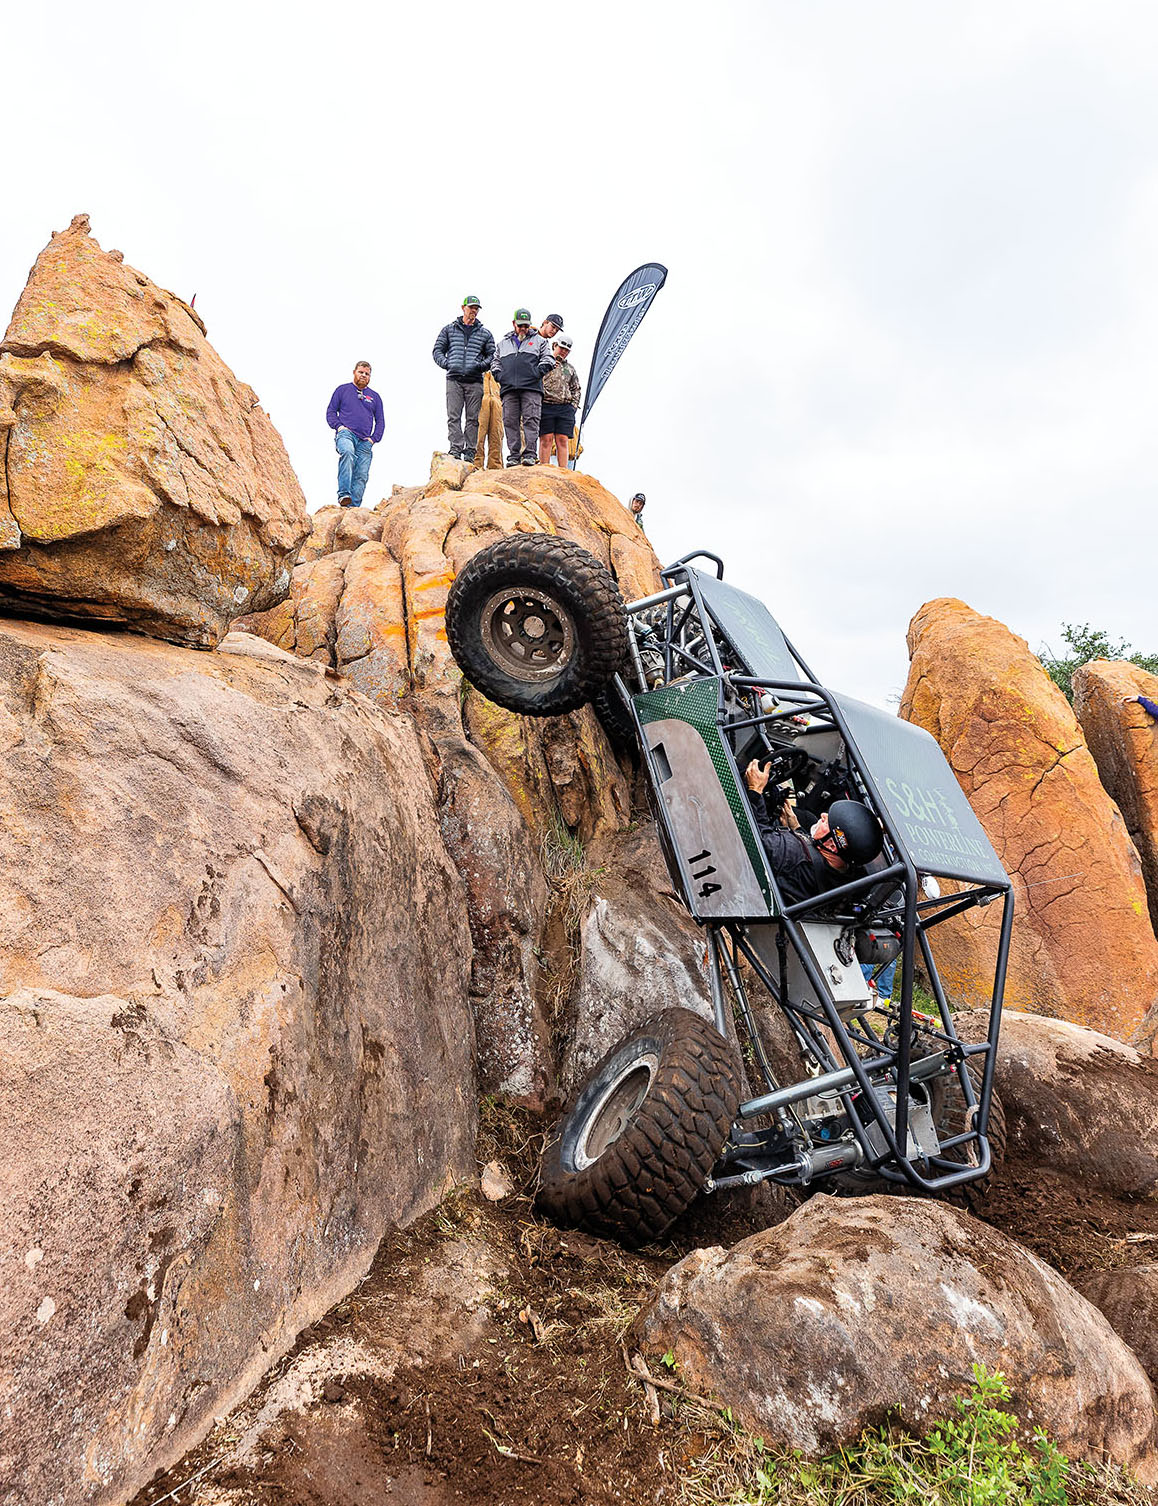 A person driving a green and black 4x4 vehicle attempts to scale a tan rock